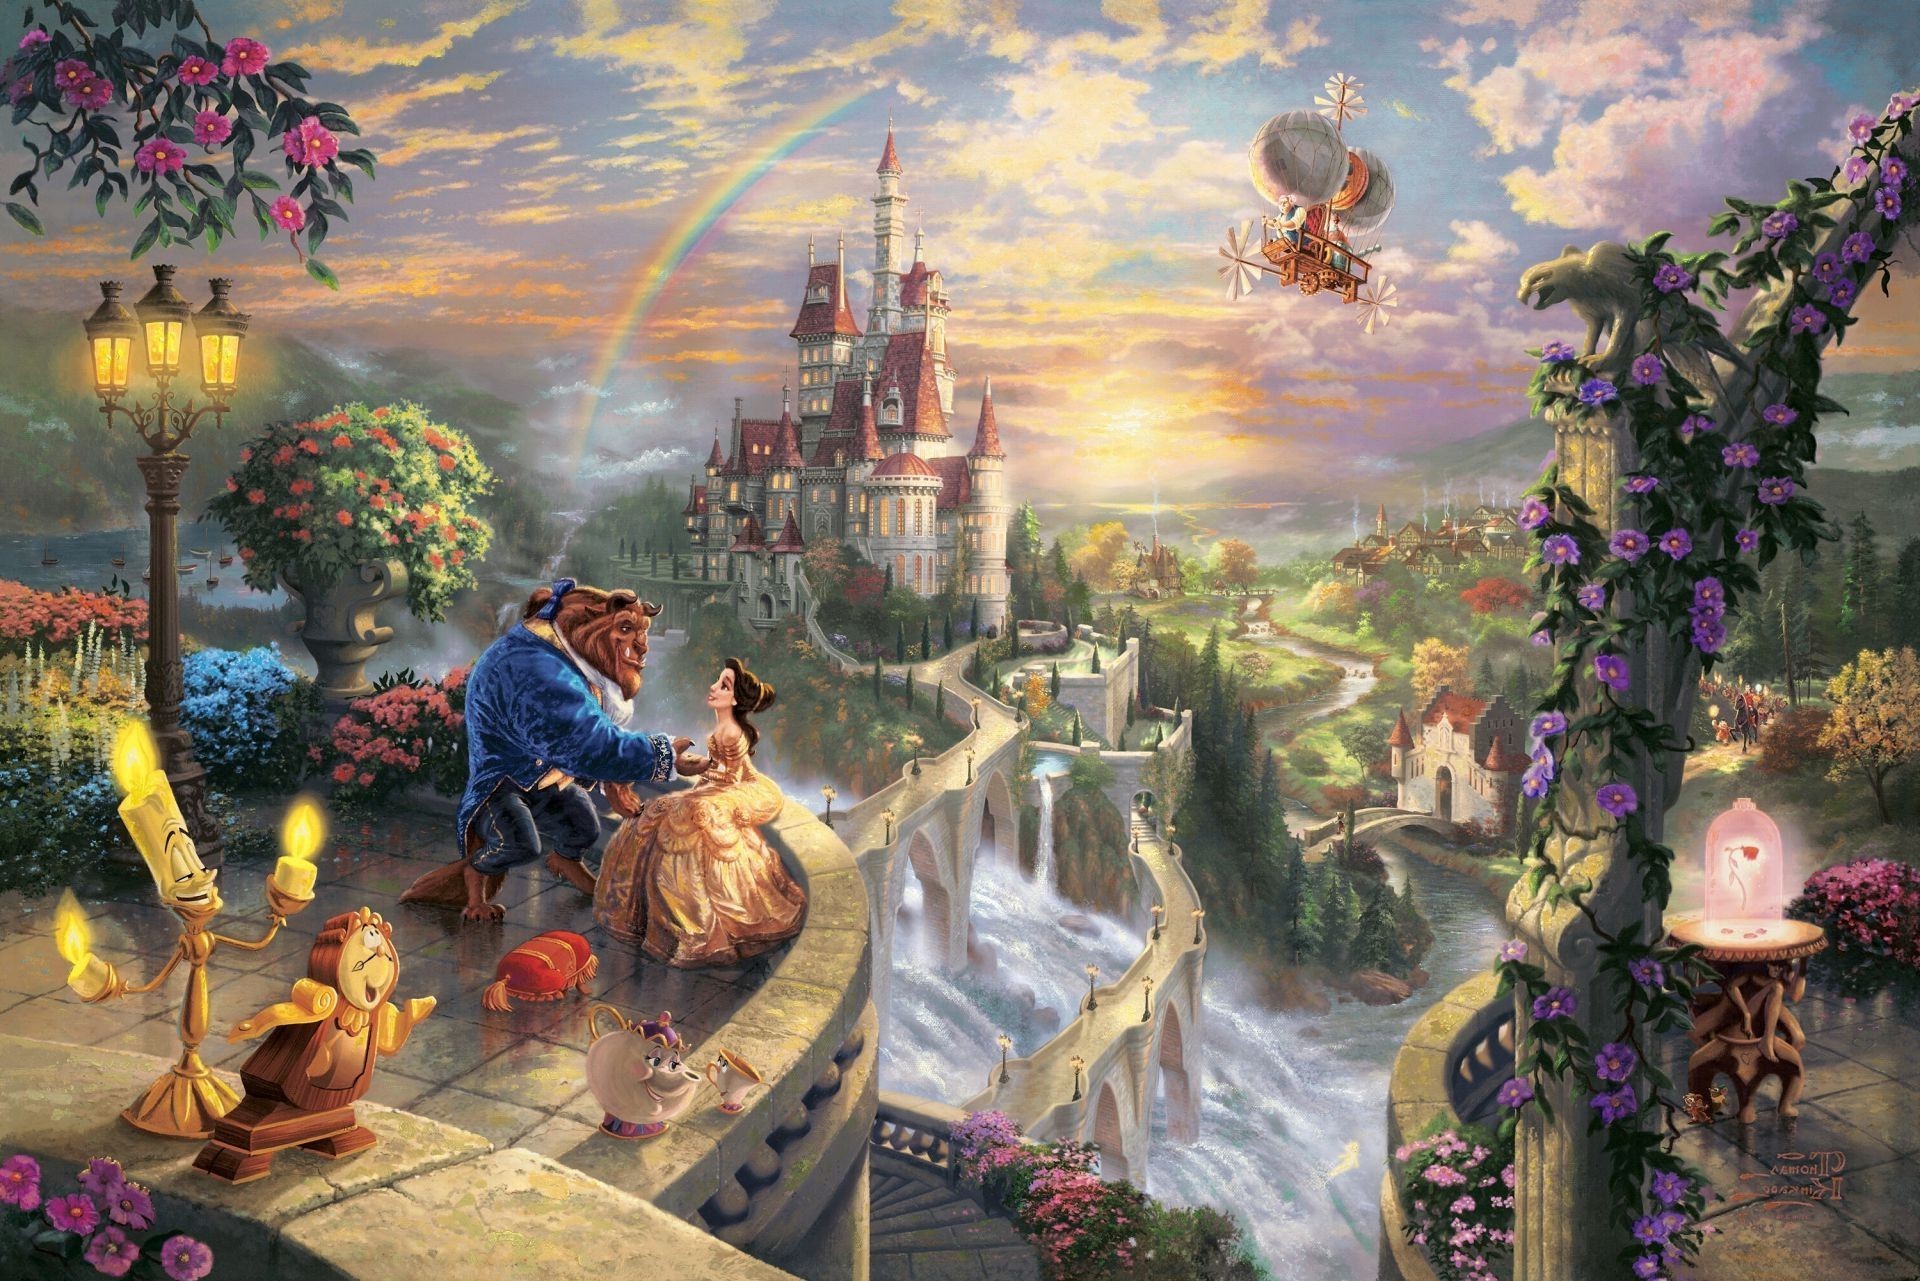 1920x1281  Thomas kinkade the disney dreams collection beauty and the.  Android wallpapers for free.